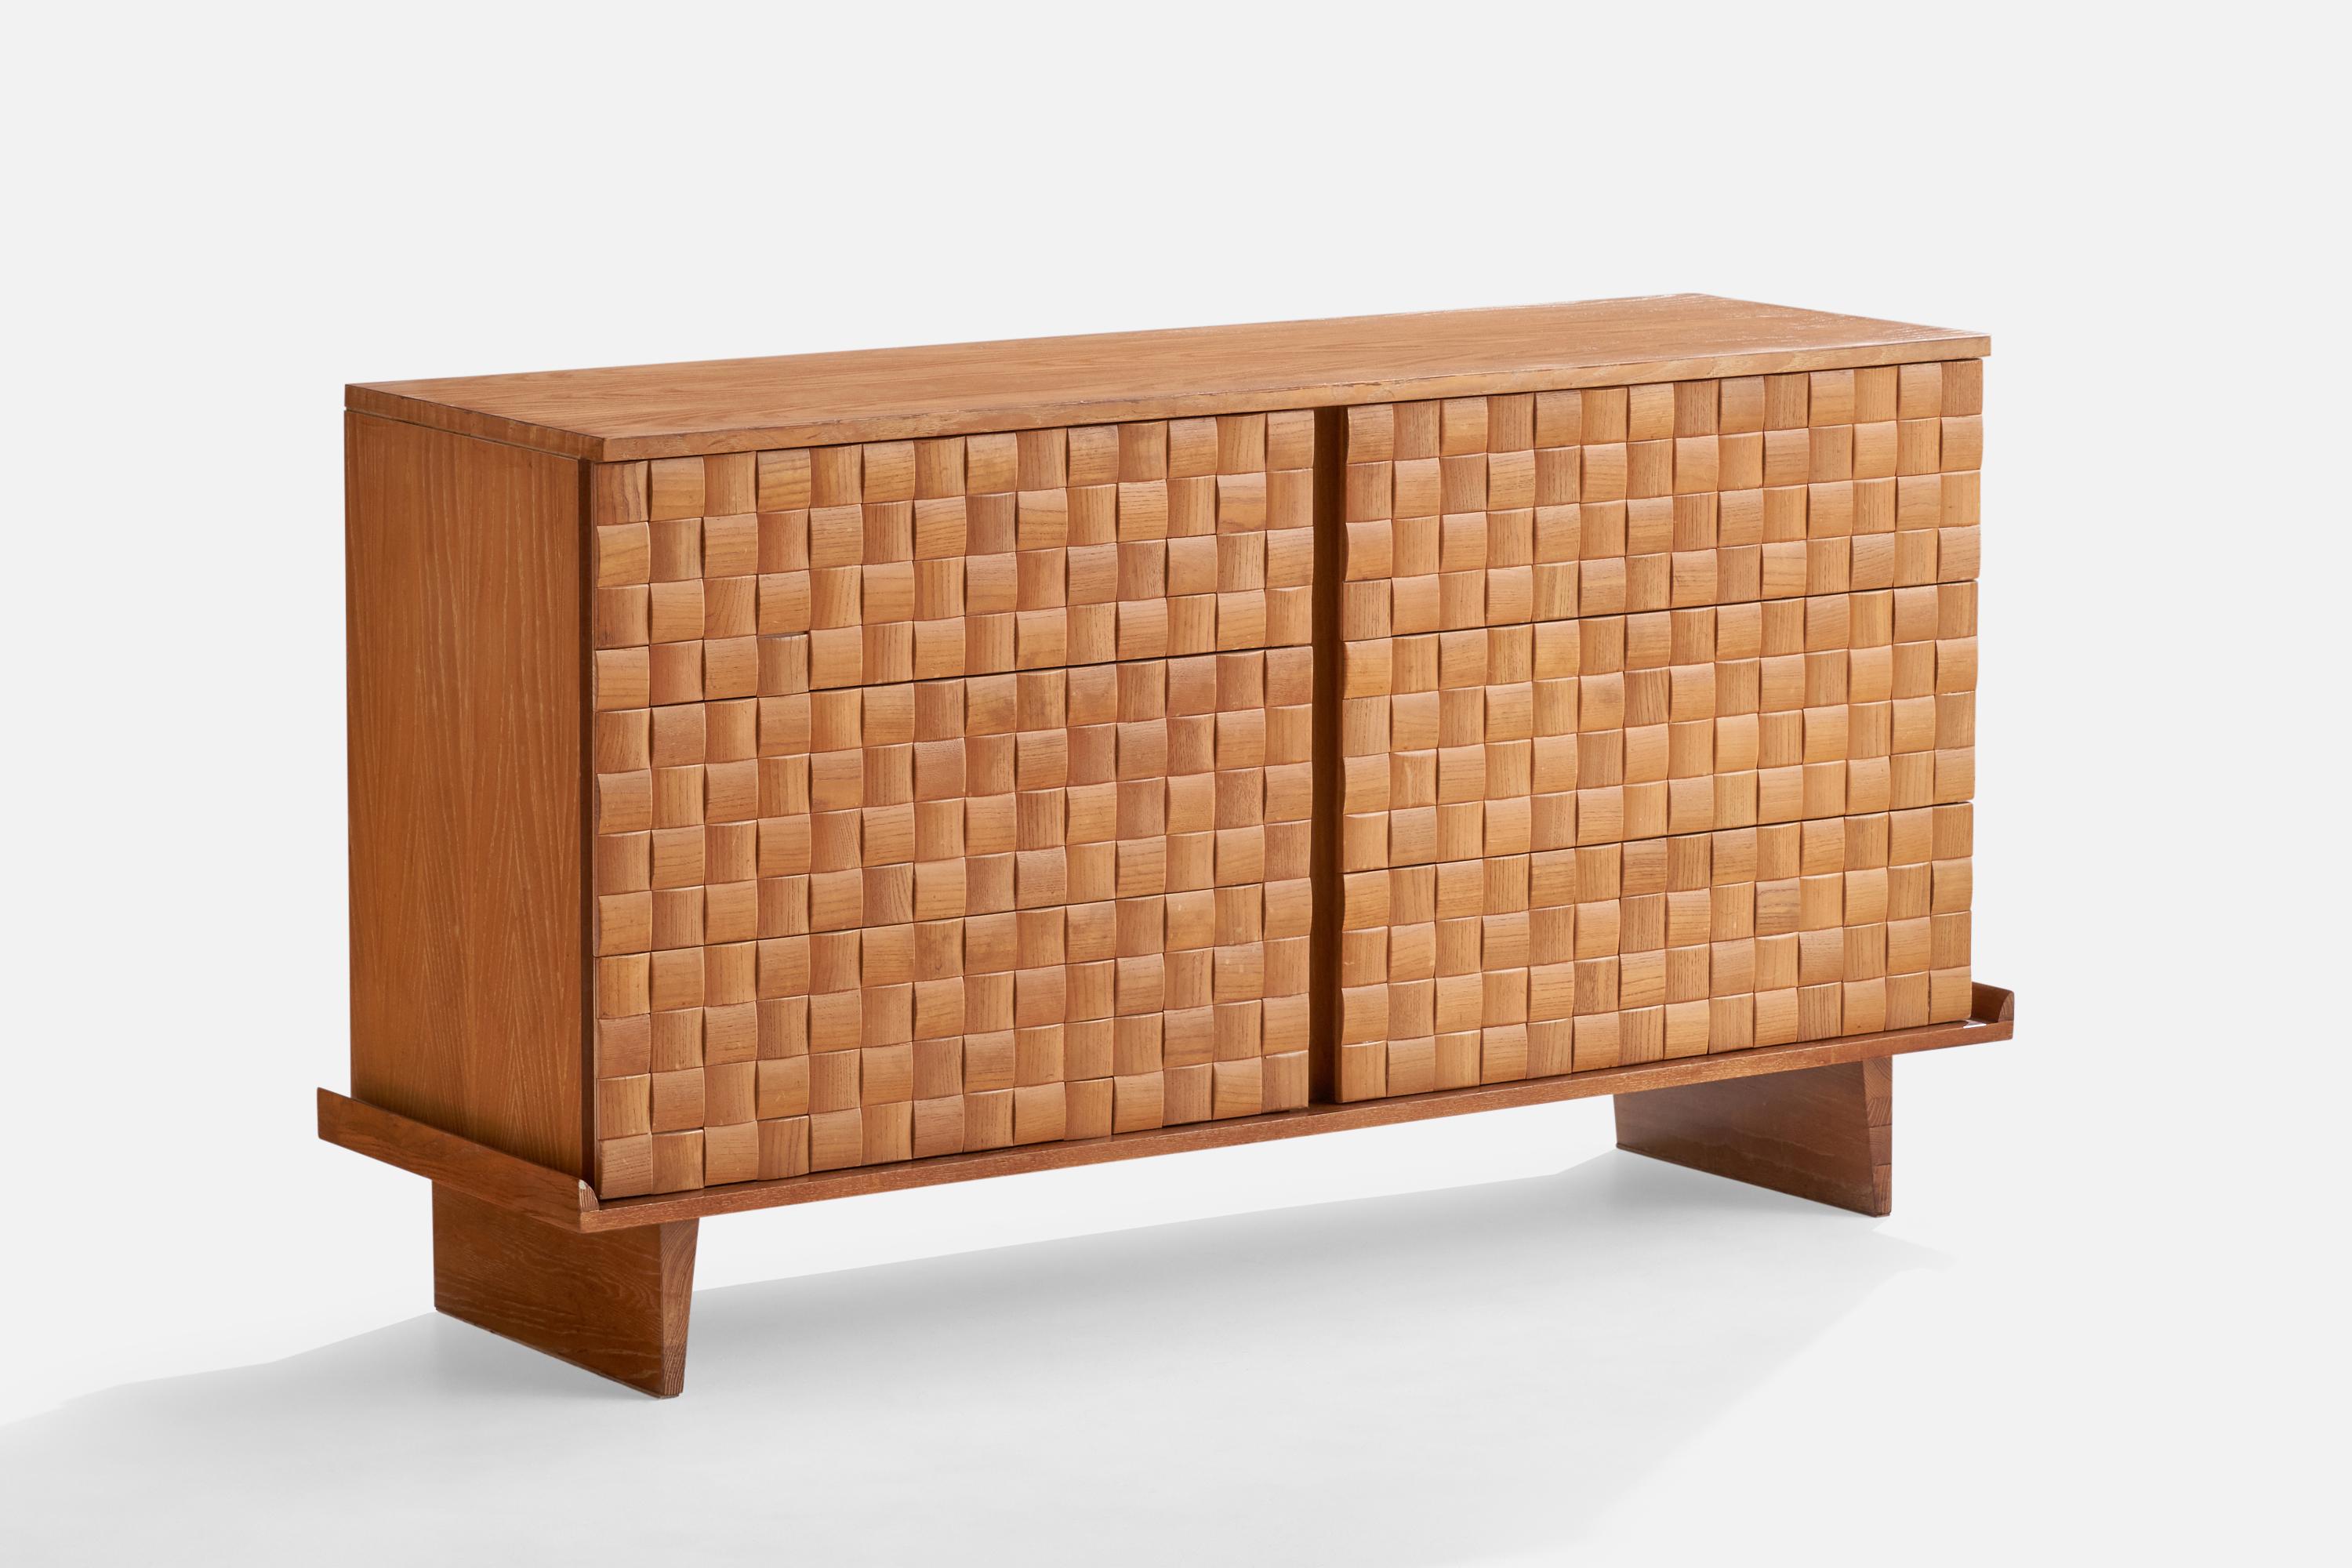 An oak dresser designed designed by Paul Laszlo and produced by Brown Saltman, USA, 1950s.